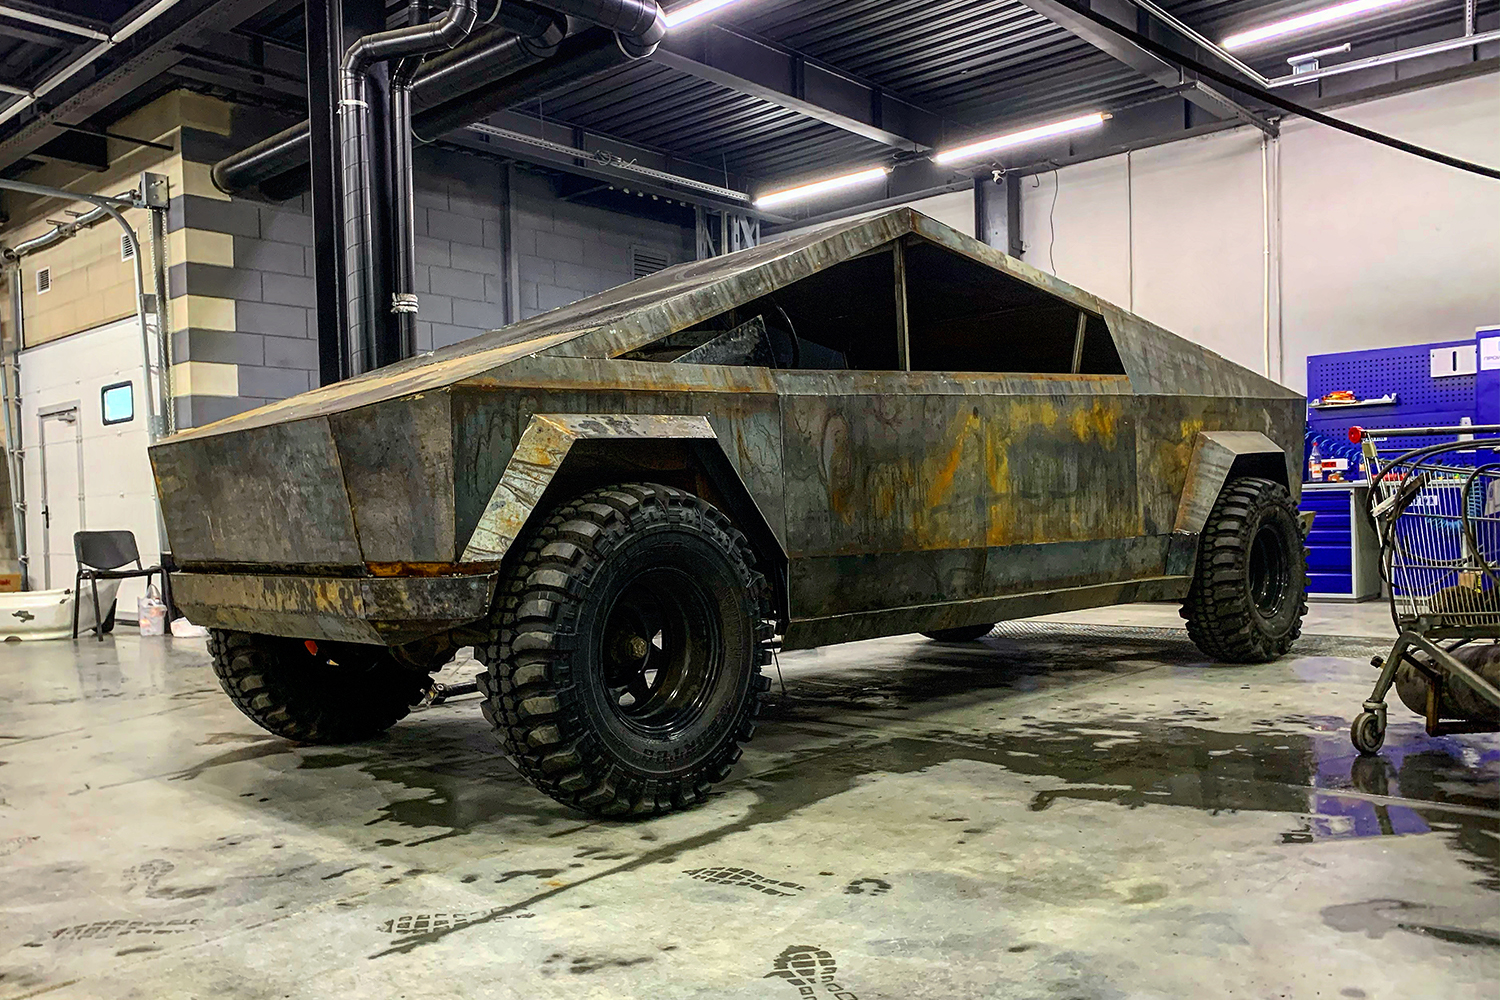 A replica Tesla Cybertruck built by the Russian YouTubers at Garage 54. We talked to Vladislav Barashenkov about building the UAZ-based vehicle